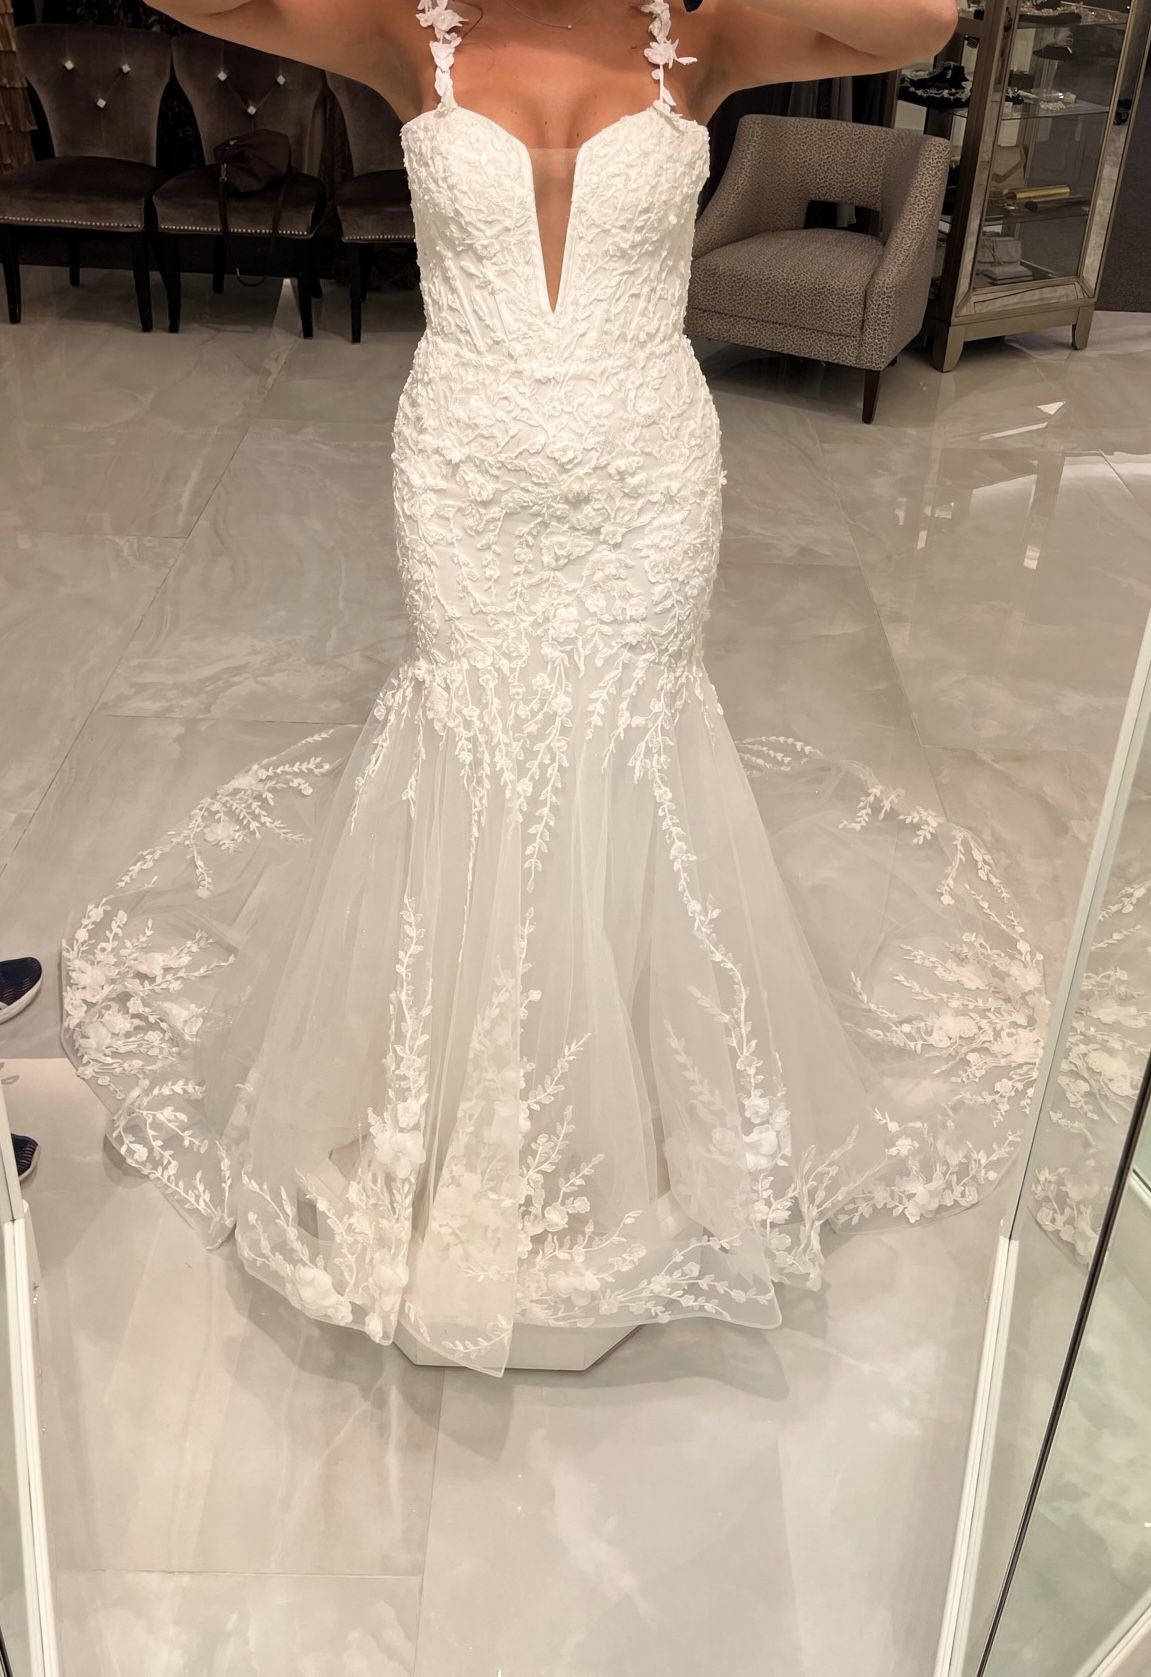 Designer Luxury Couture Bridal Gown Dress 